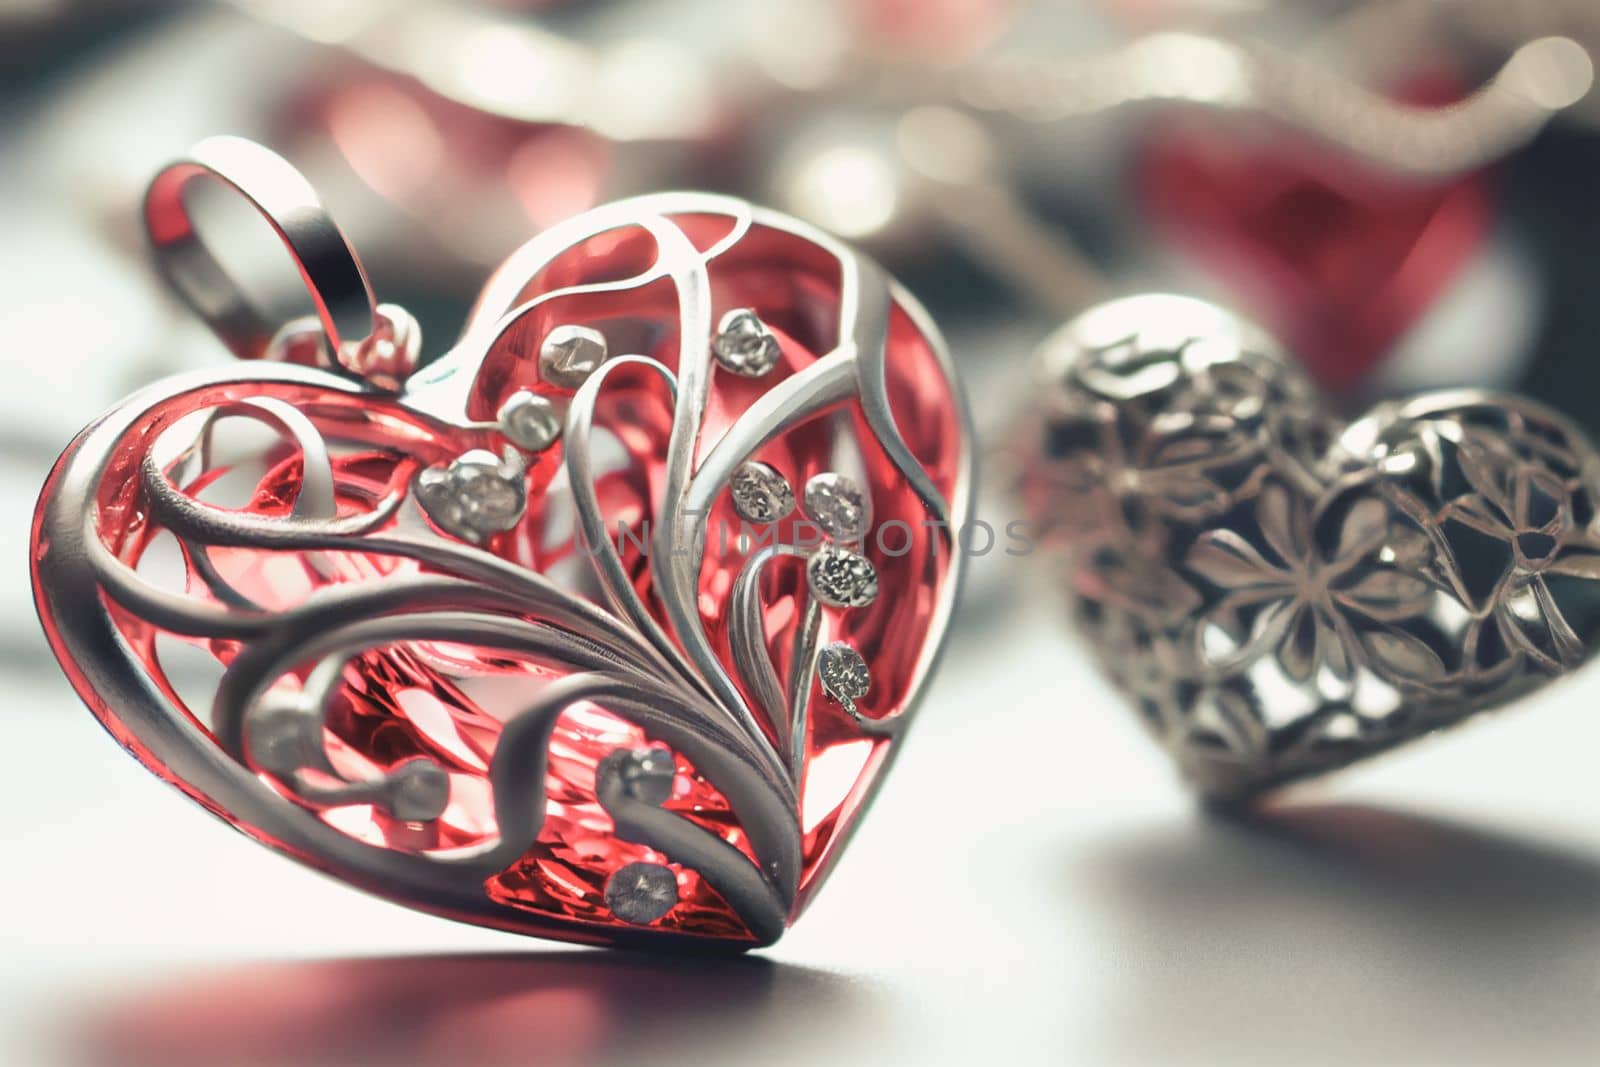 Close up shot of heart jewelry for Valentine's Day background with copy space. Gift ideas. Design for Valentine's Day festive banner.